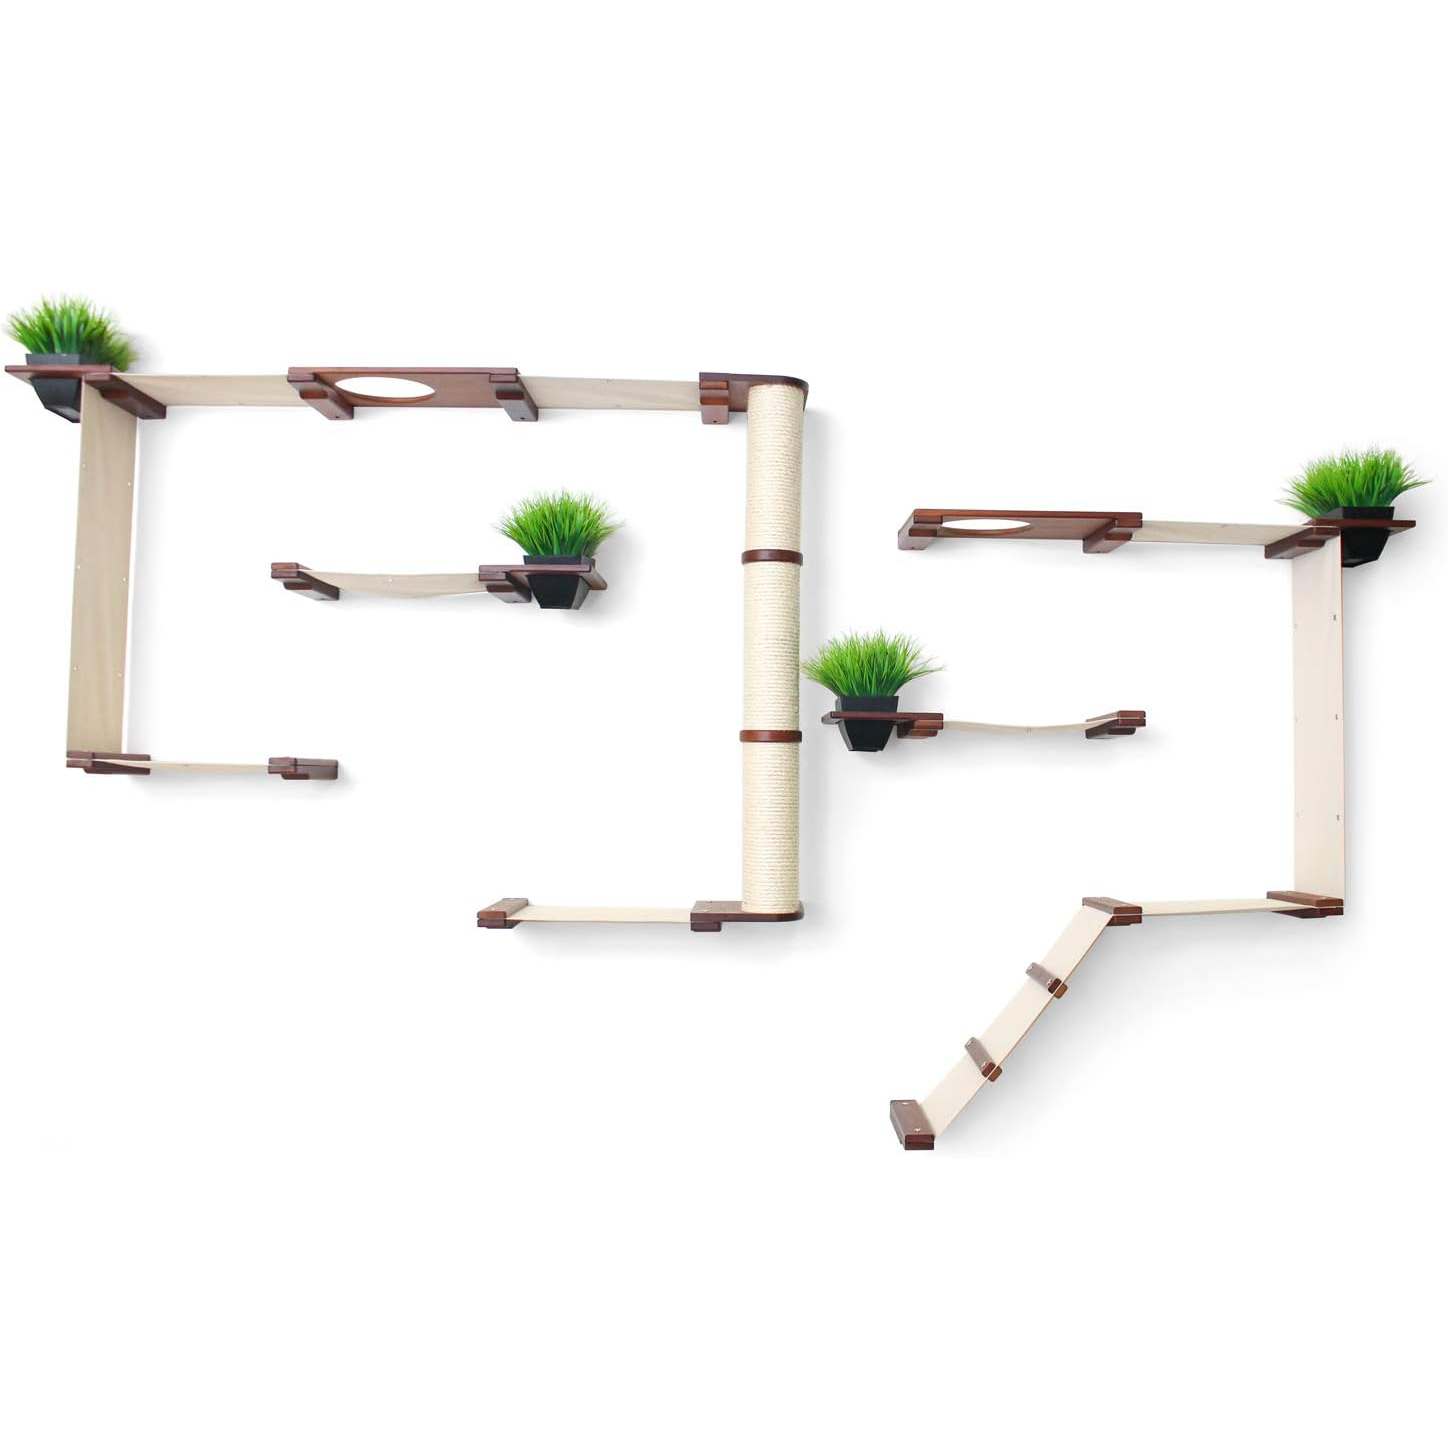 CatastrophiCreations Gardens Set for Cats Multiple-Level Wall Mounted Scratch, Hammock Lounge, Play & Climbing Activity Center Furniture Cat Tree Shelves New